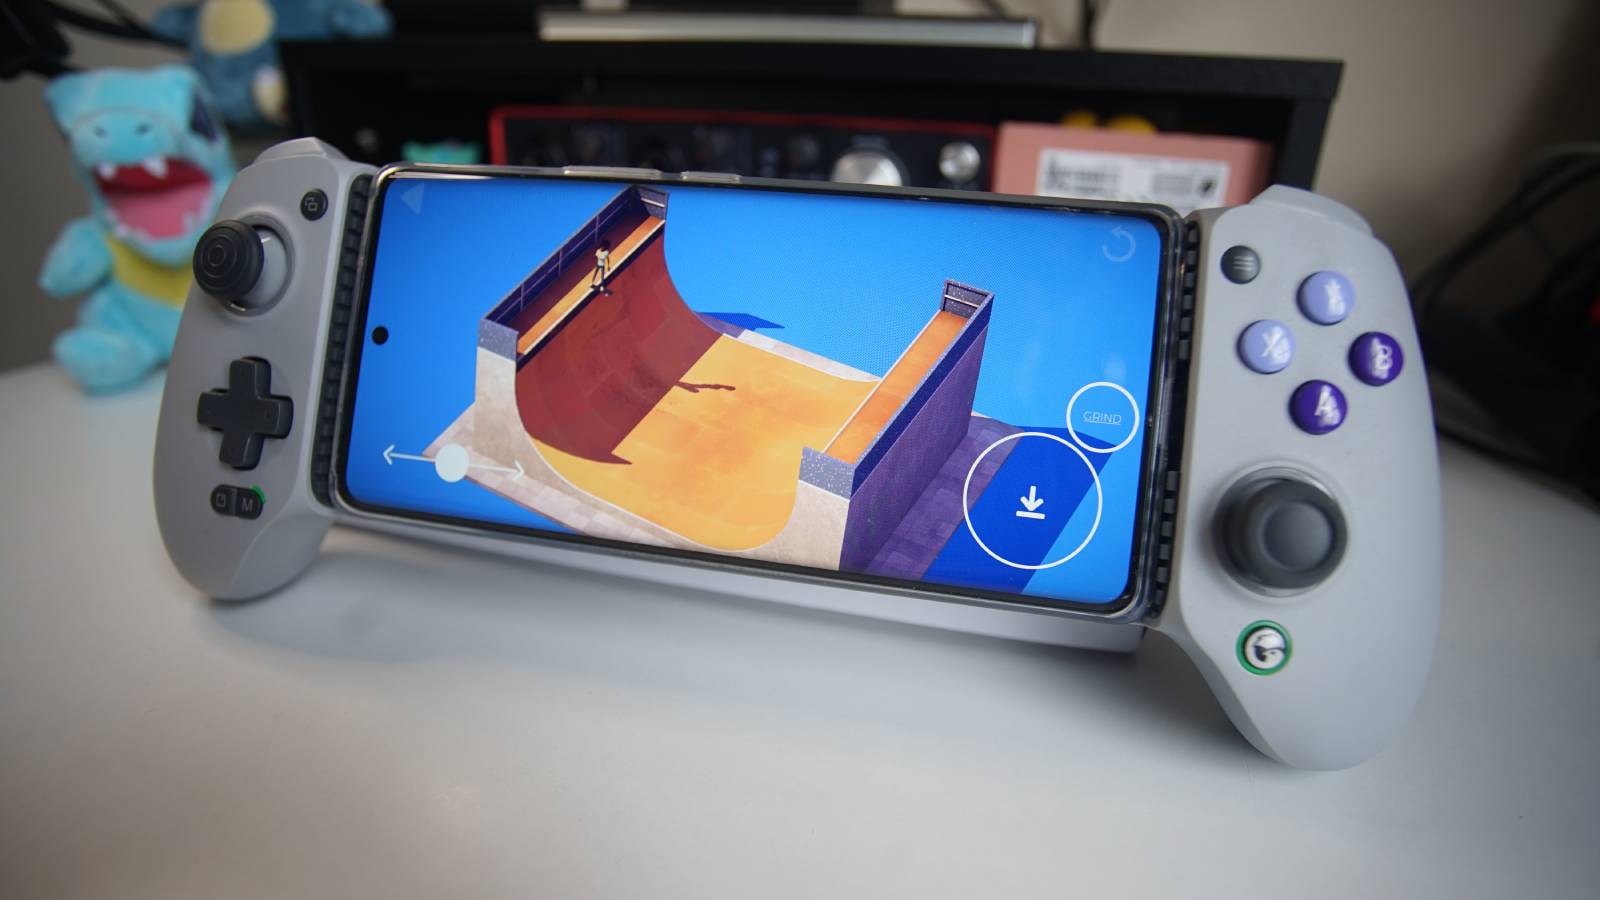 The GameSir G8 Galileo mobile controller is propped up, with a phone fixed into the device playing The Ramp